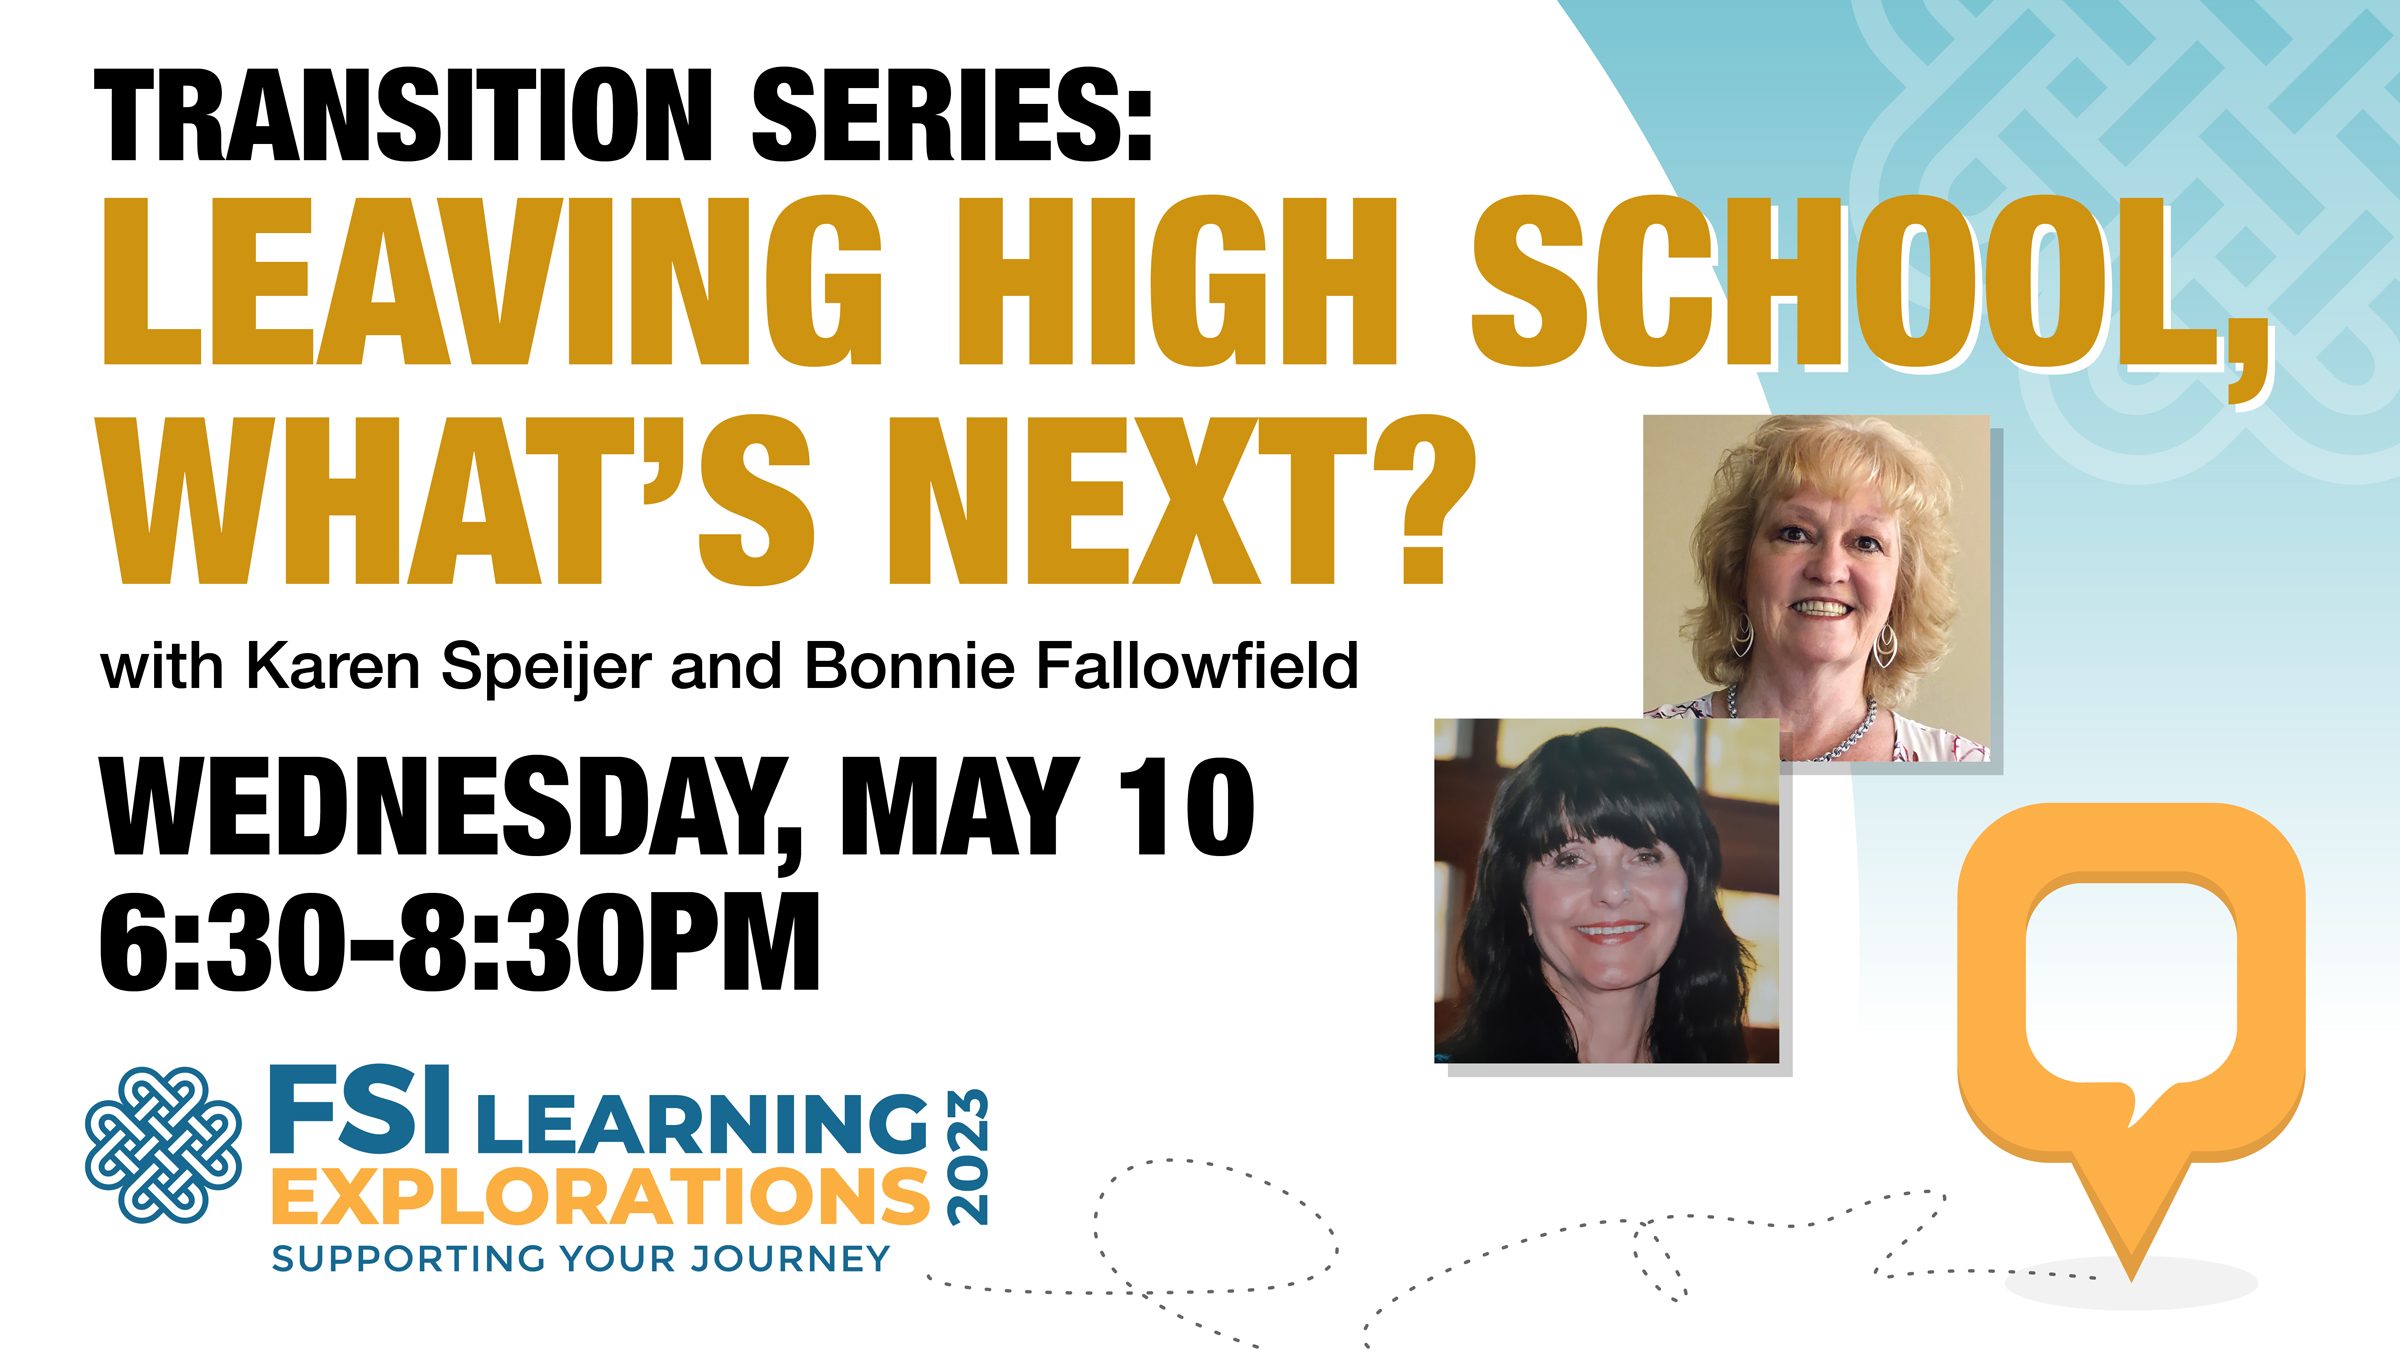 FSI Learning Explorations - Leaving High School: What's Next?